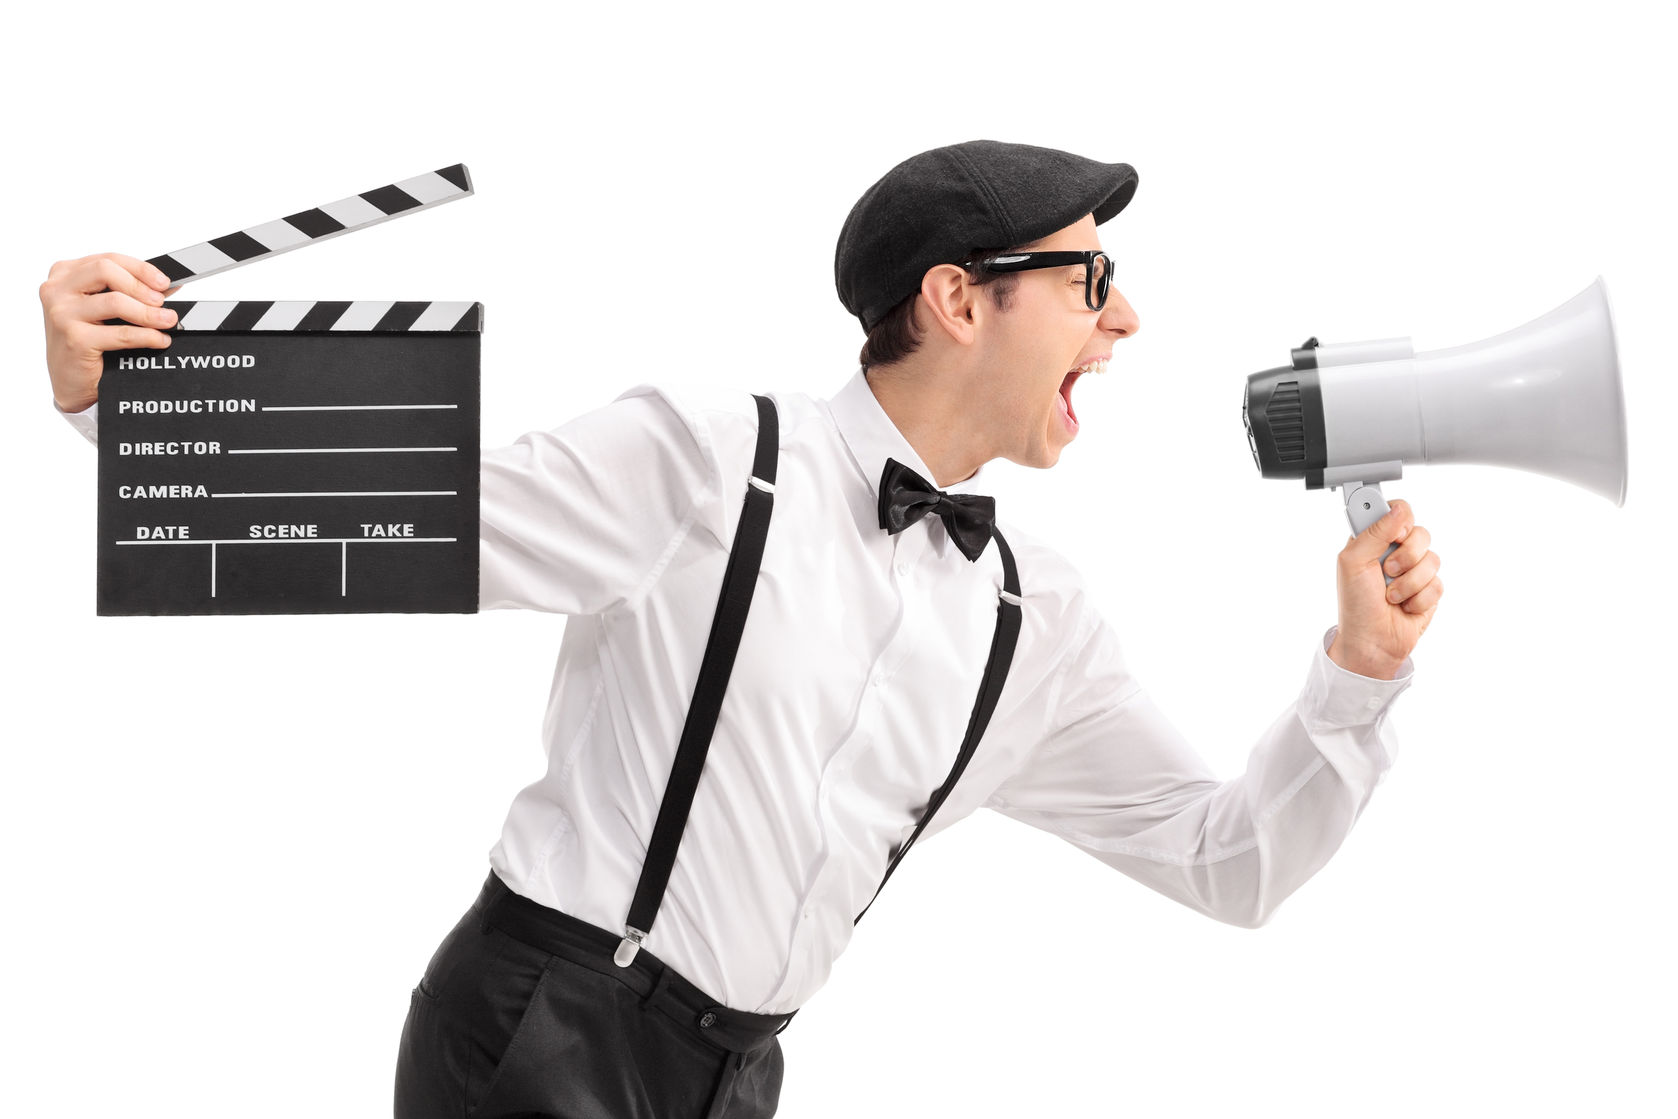 42870735 - young movie director holding a clapperboard and shouting on a megaphone isolated on white background